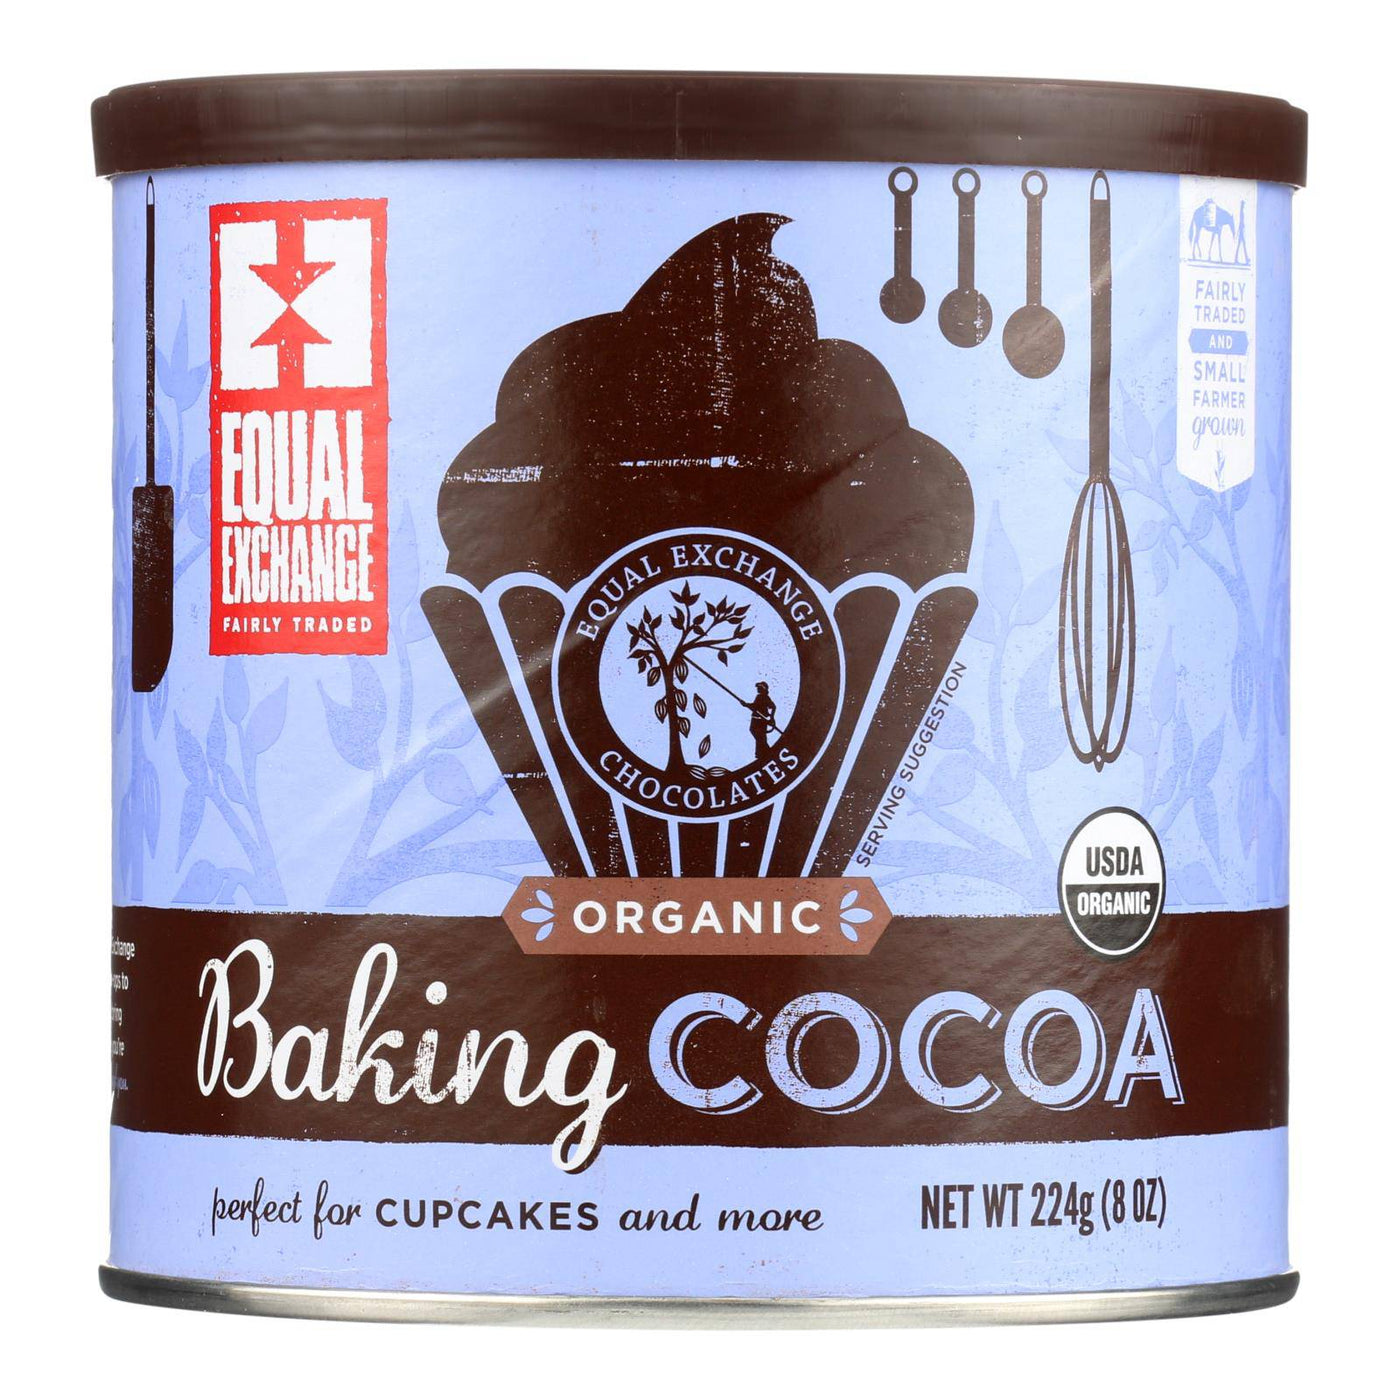 Buy Equal Exchange Organic Baking Cocoa - Case Of 6 - 8 Oz.  at OnlyNaturals.us